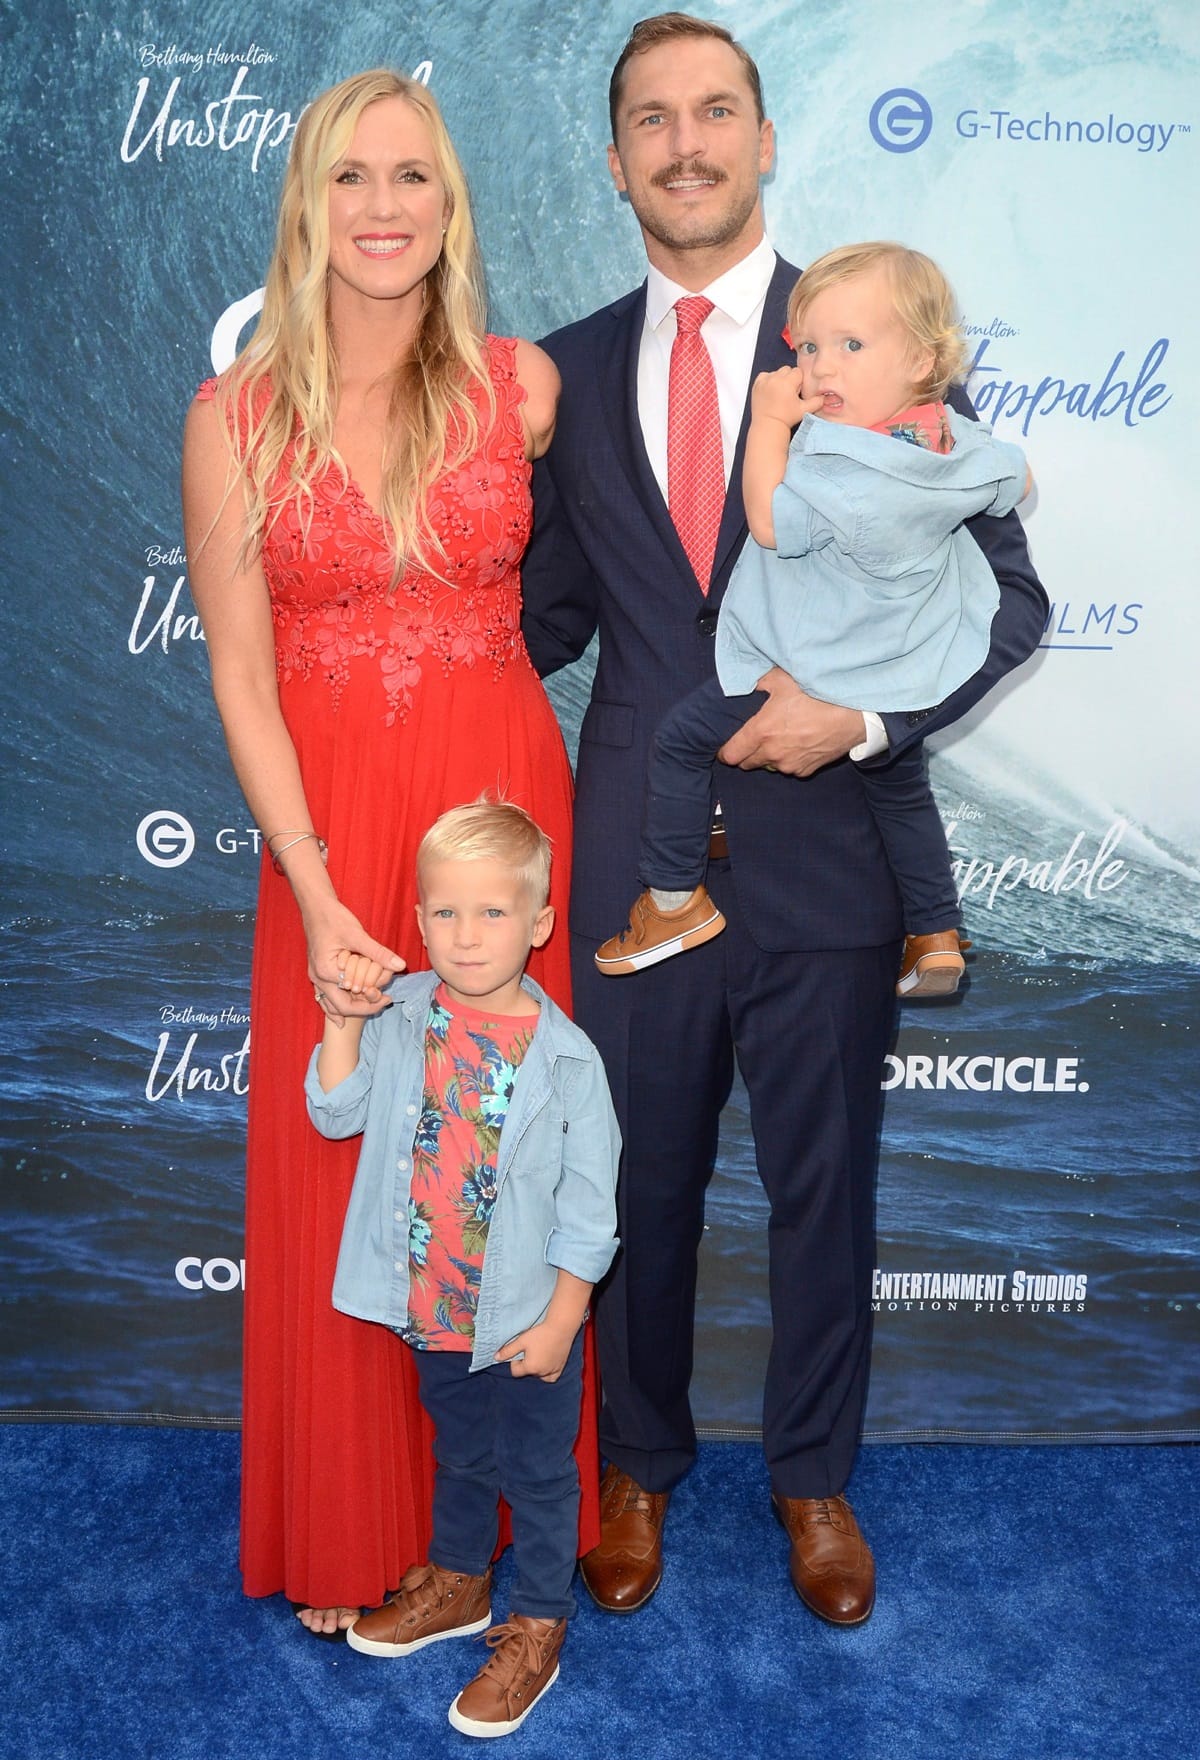 After meeting in early 2012, Bethany Hamilton and Adam Dirks exchanged vows on August 18, 2013, and joyfully embraced parenthood, raising three sons together